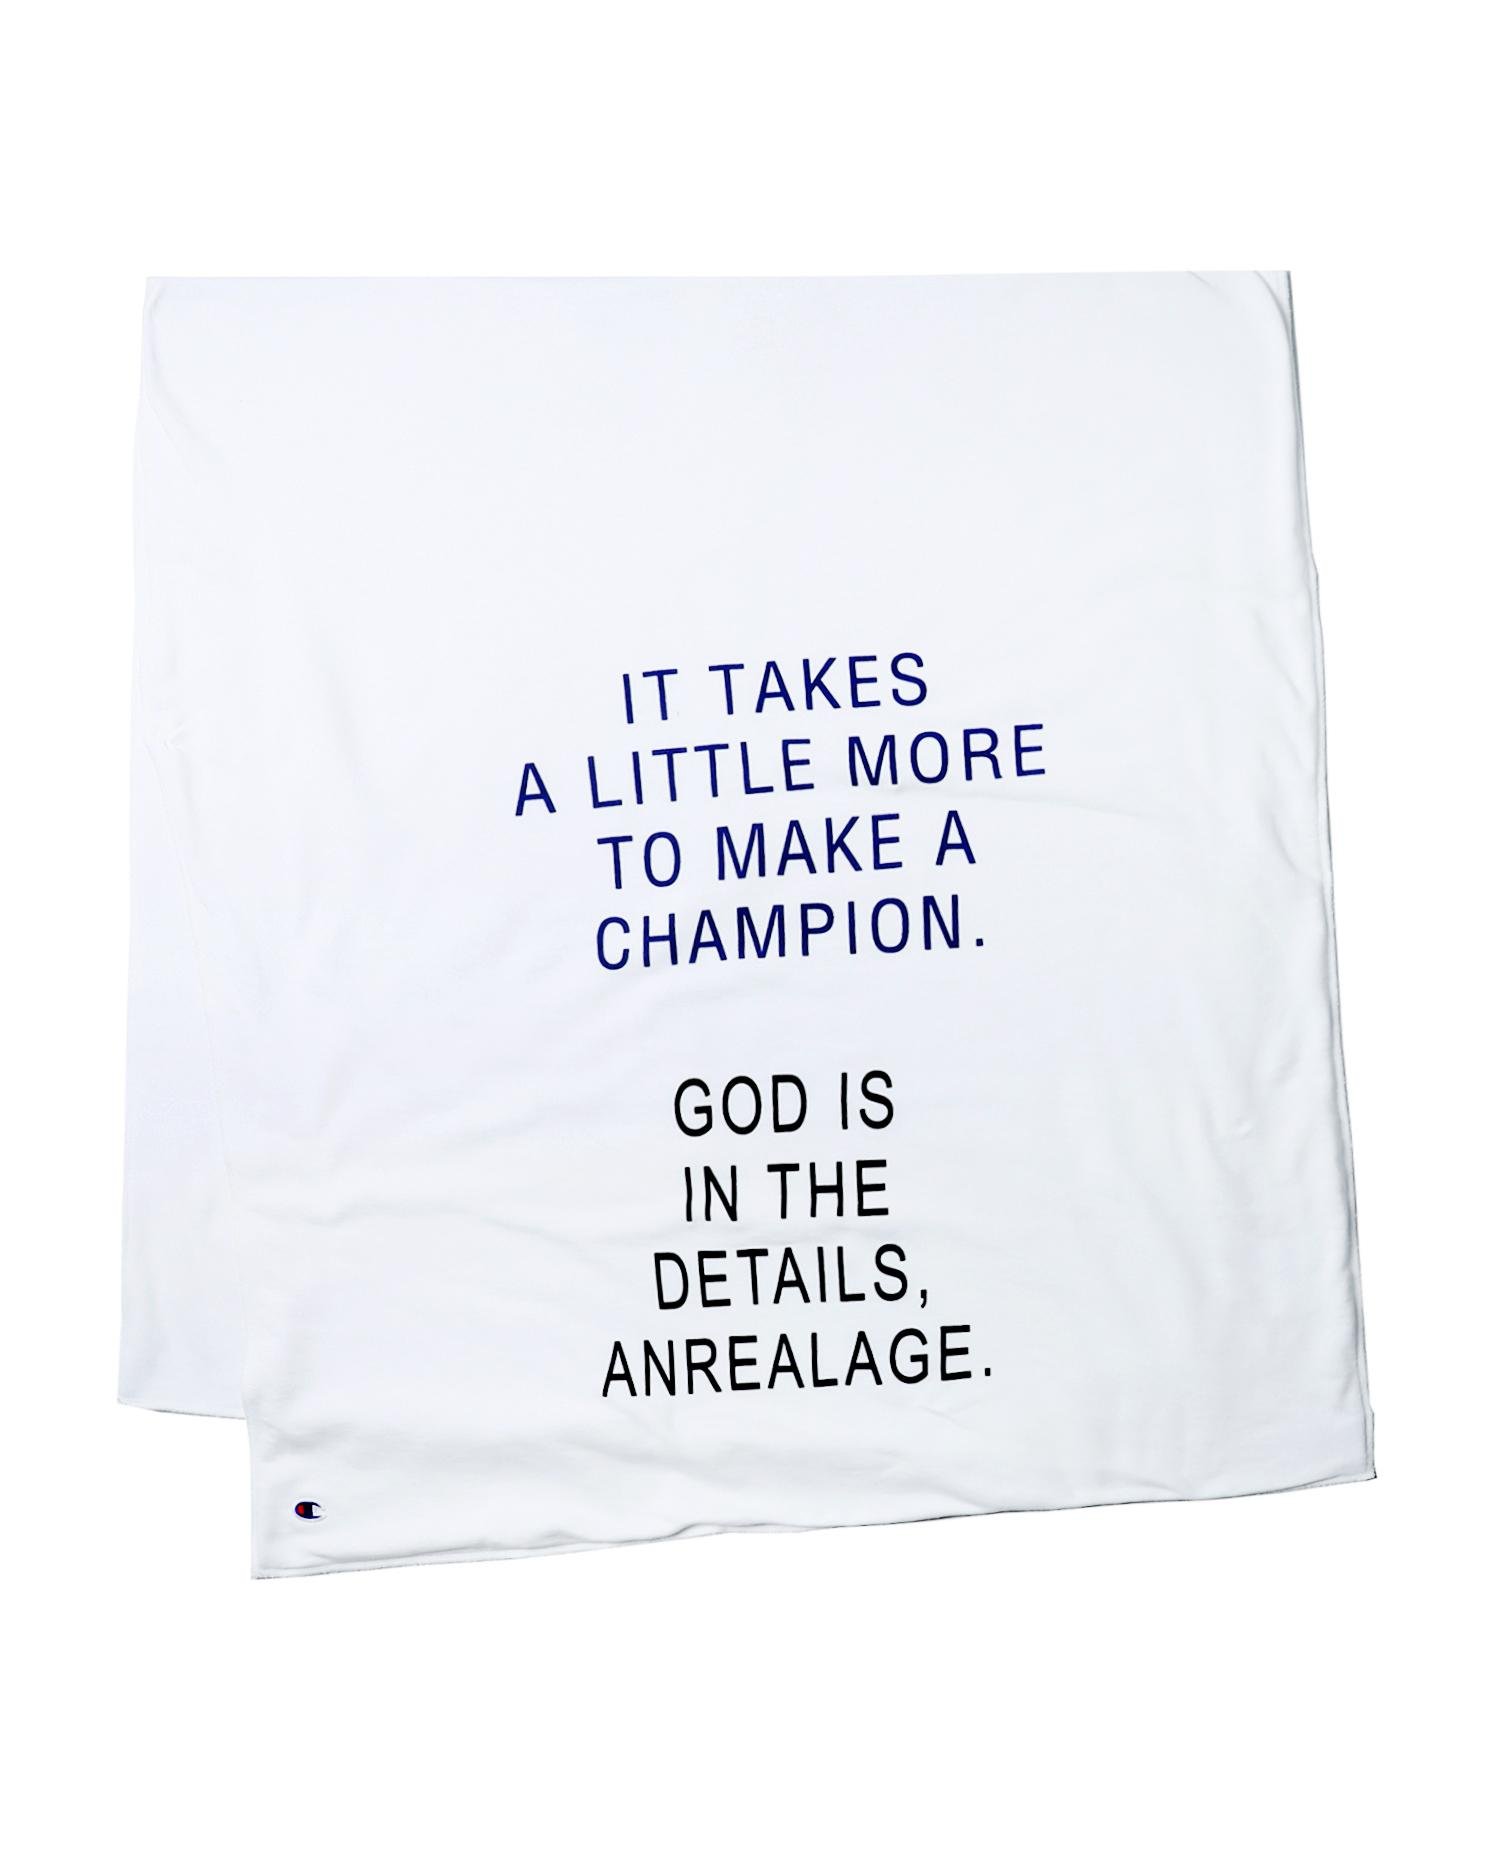 X Champion scarf by ANREALAGE